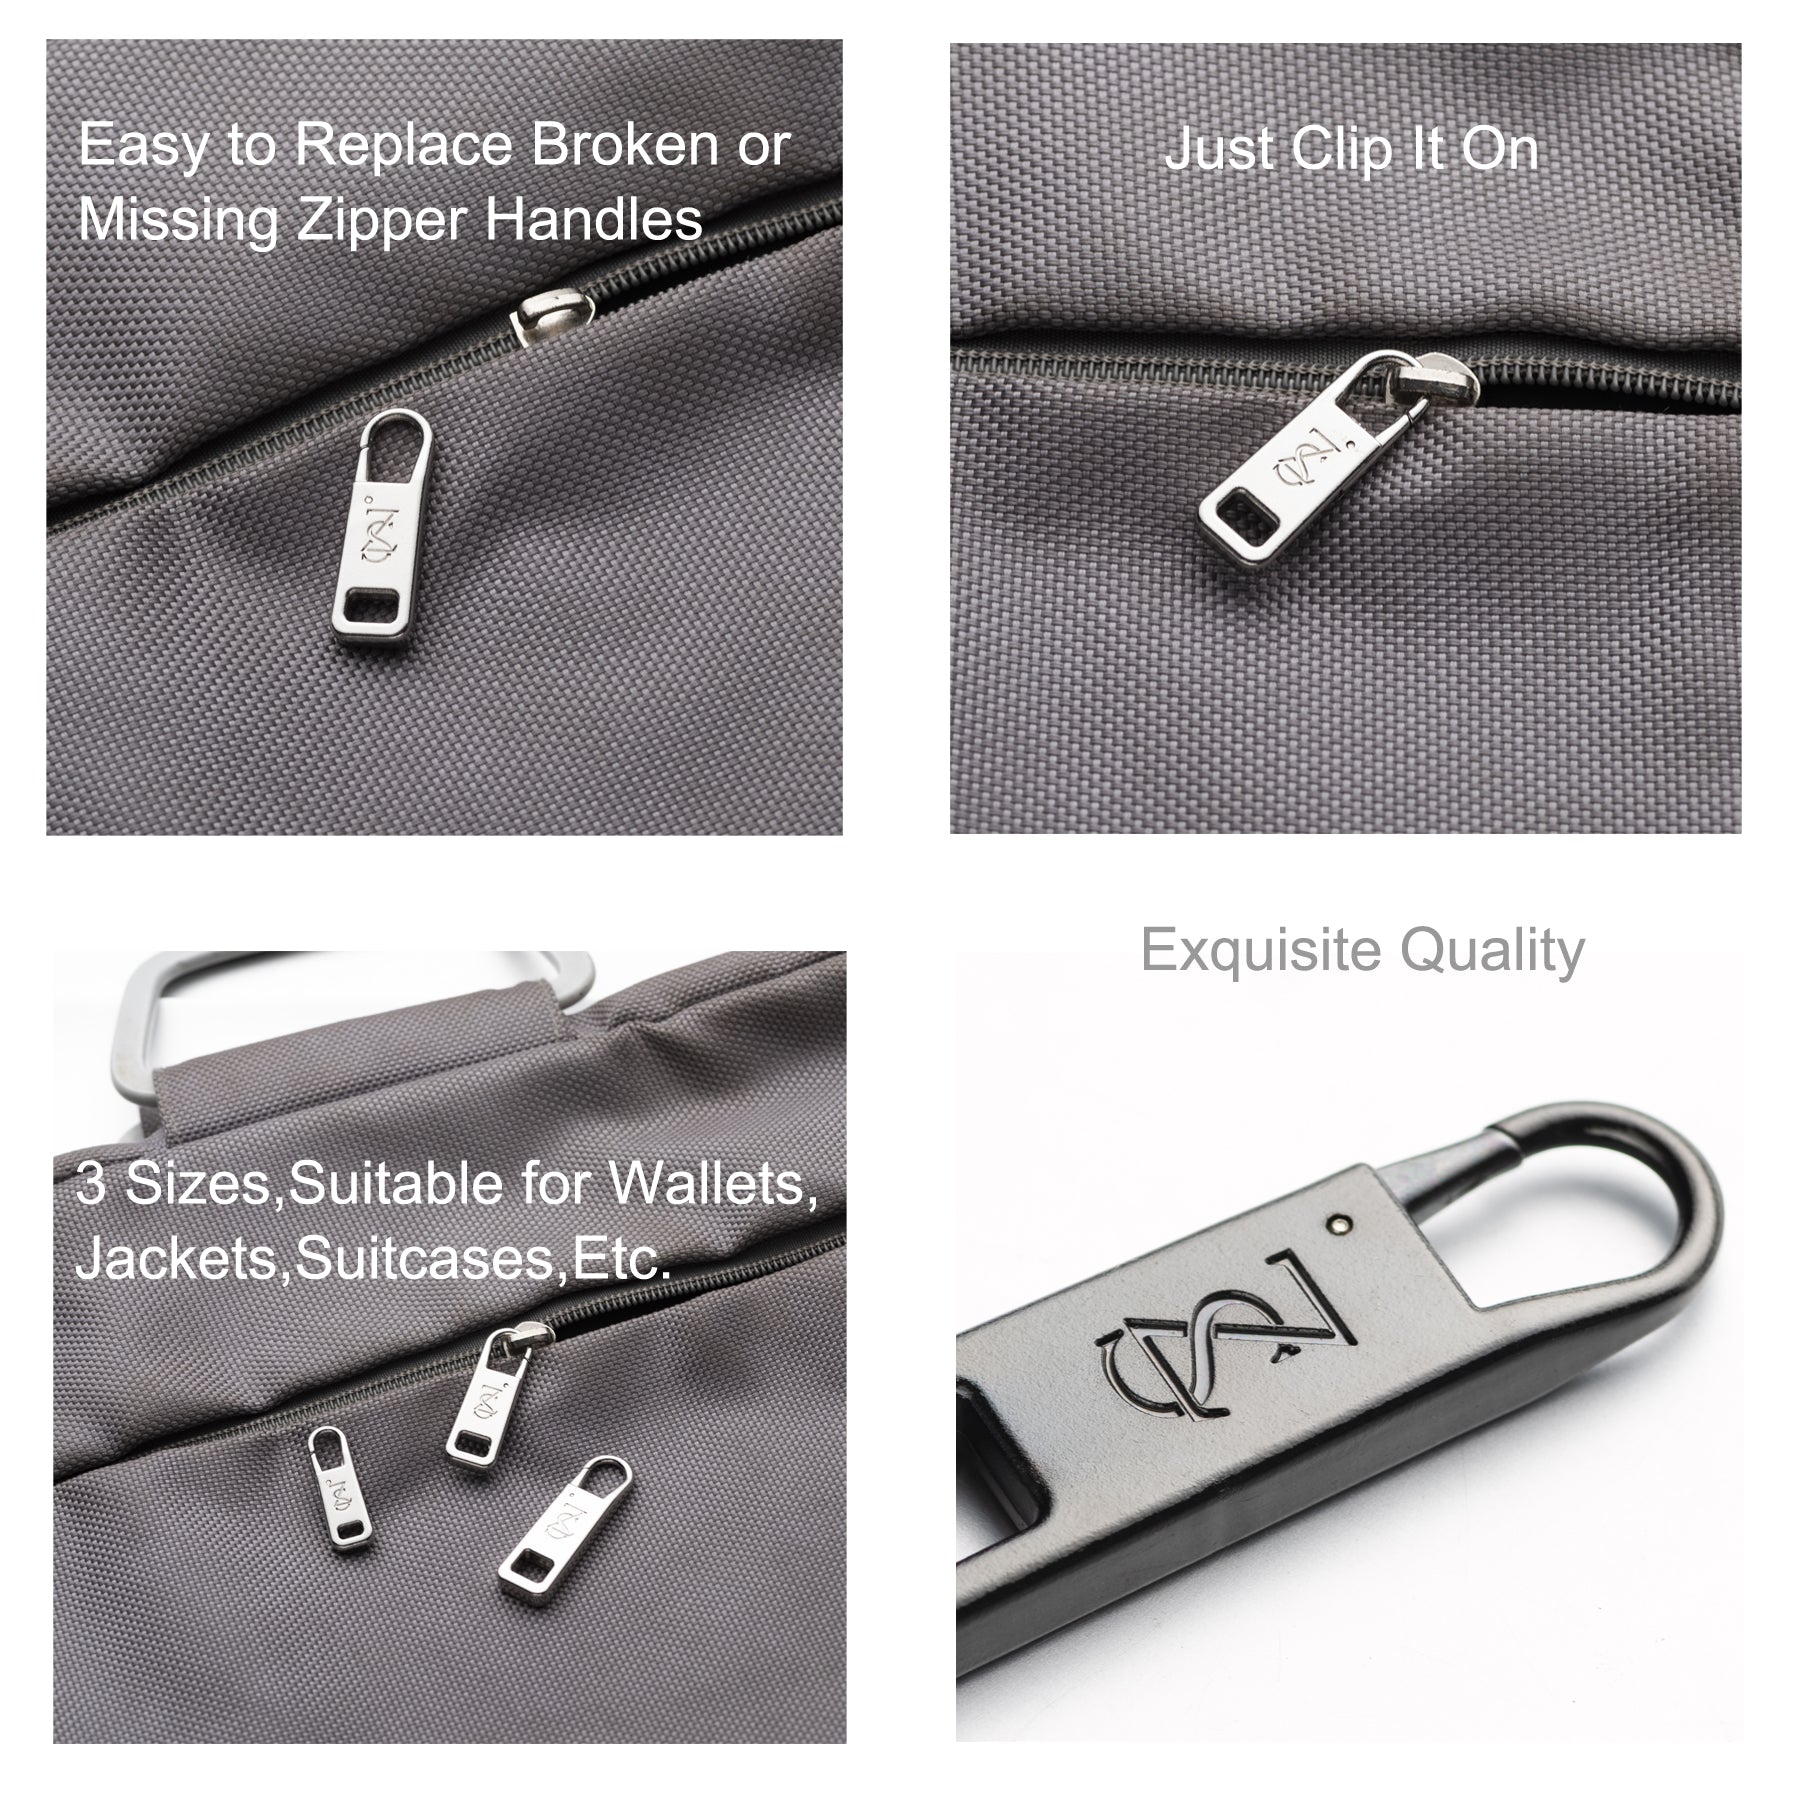 3 Size Zipper Tab Replacement Easy to Replace Broken or Missing Zipper Handles